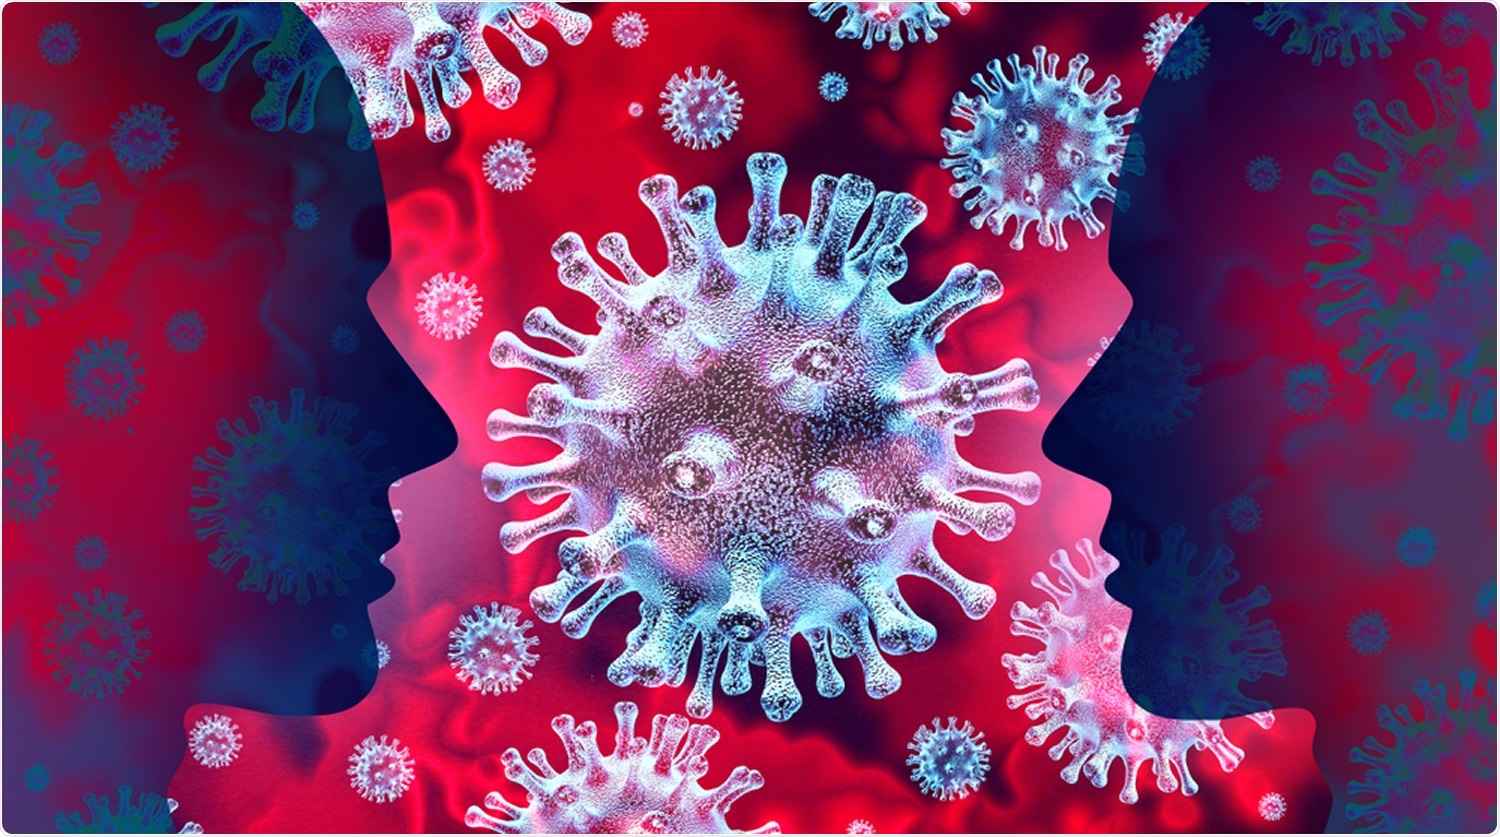 Study: COVID-19 breakthrough infections and pre-infection neutralizing antibody. Image Credit: Lightspring / Shutterstock